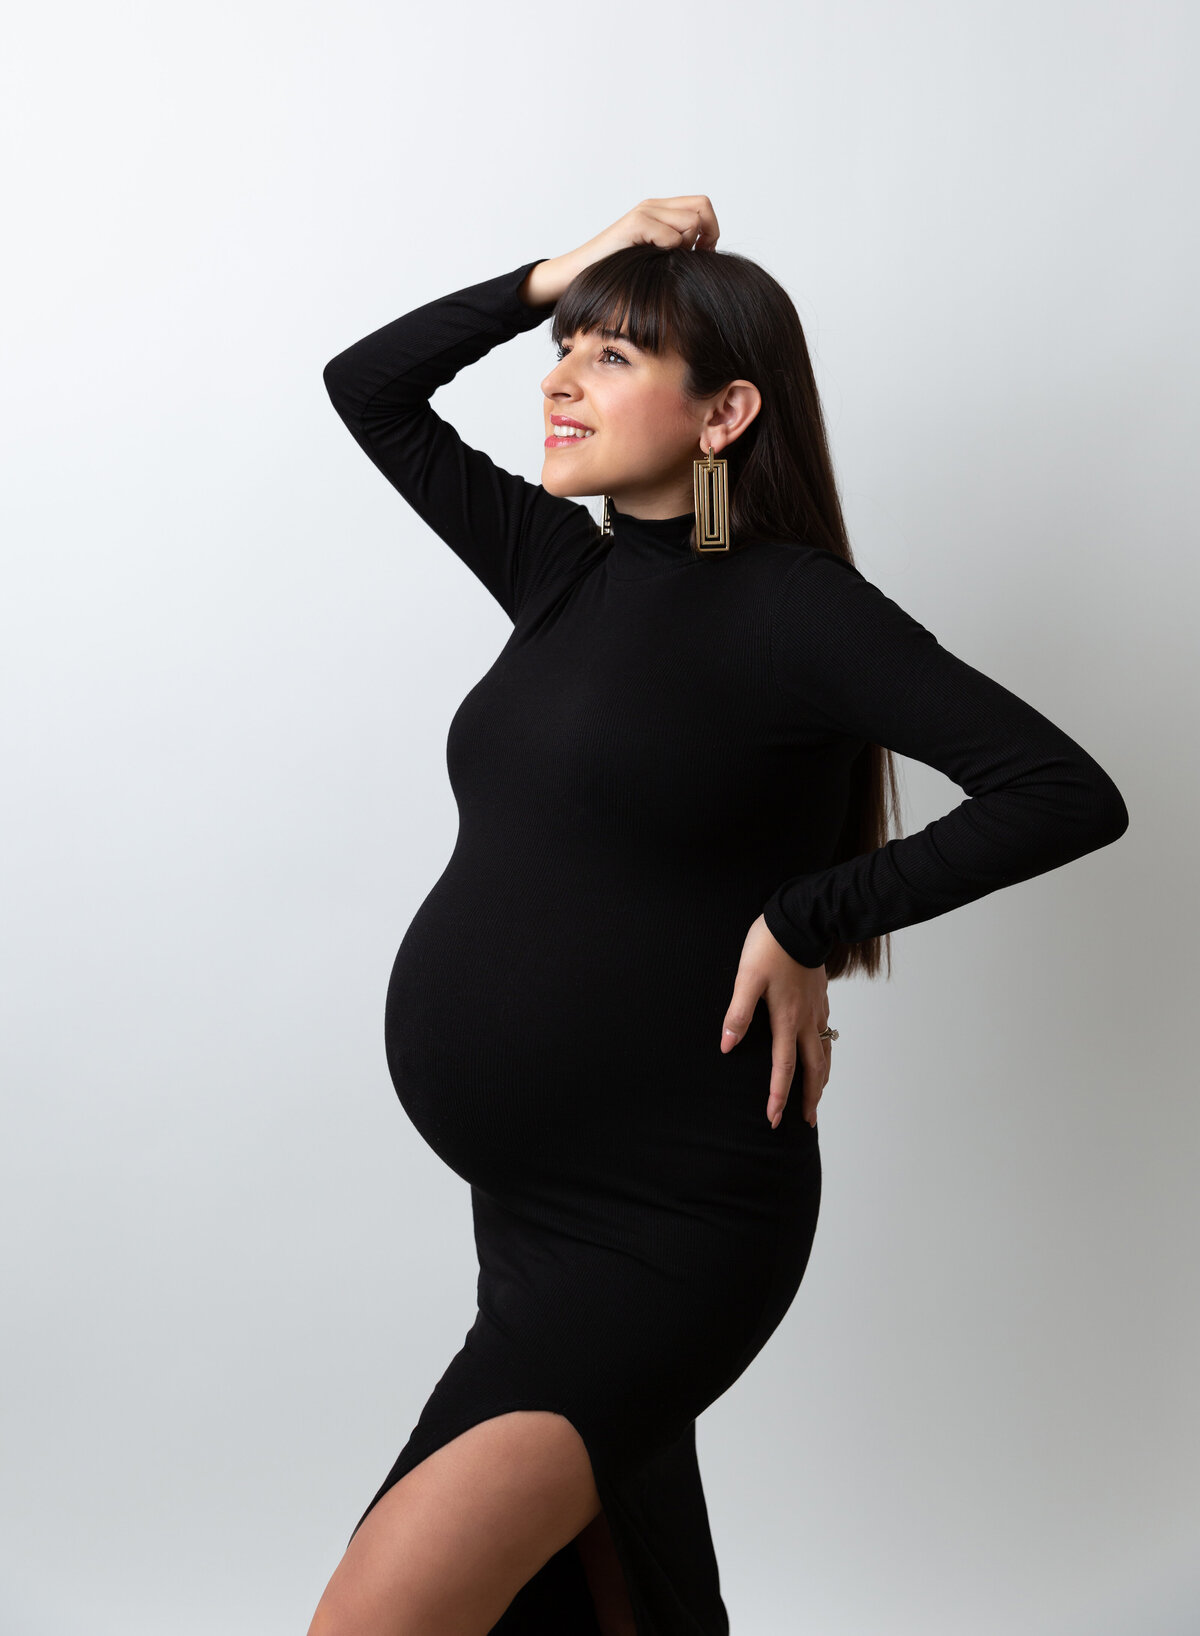 Expectant mom in fitted black gown stands with her side profile to the camera. One had is at the small of her back, the other is pushing her hair off her forehead. She is smiling toward the light.